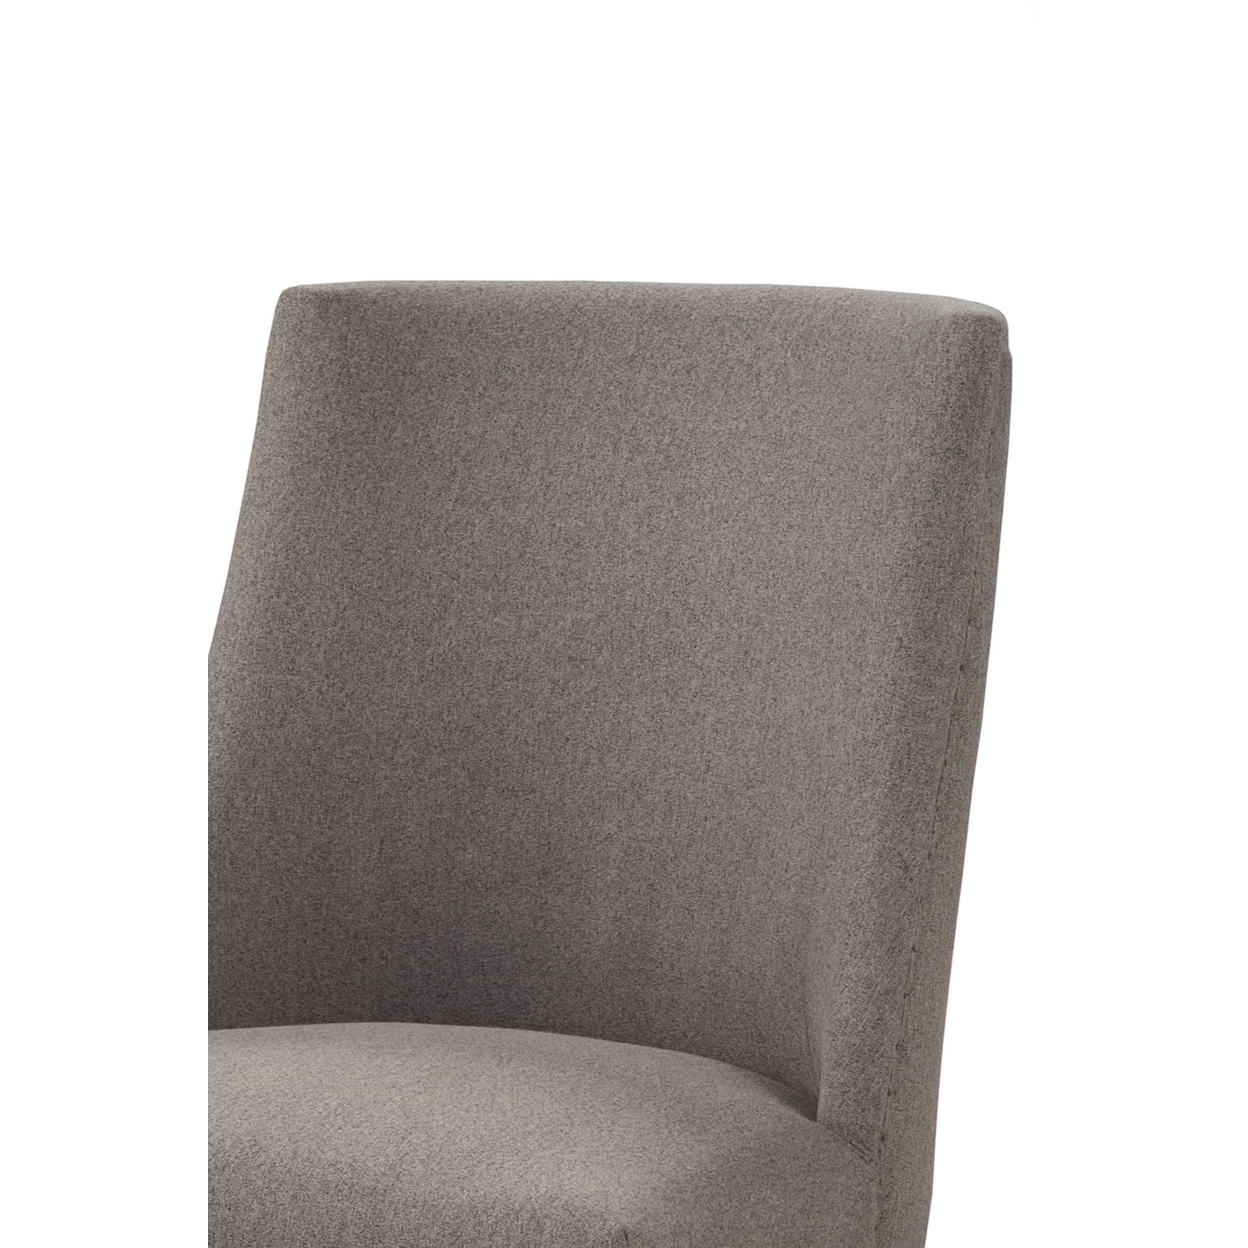 Fabric Upholstered Wooden Side Chairs With Curved Backrest, Set Of Two, Gray And Brown- Saltoro Sherpi